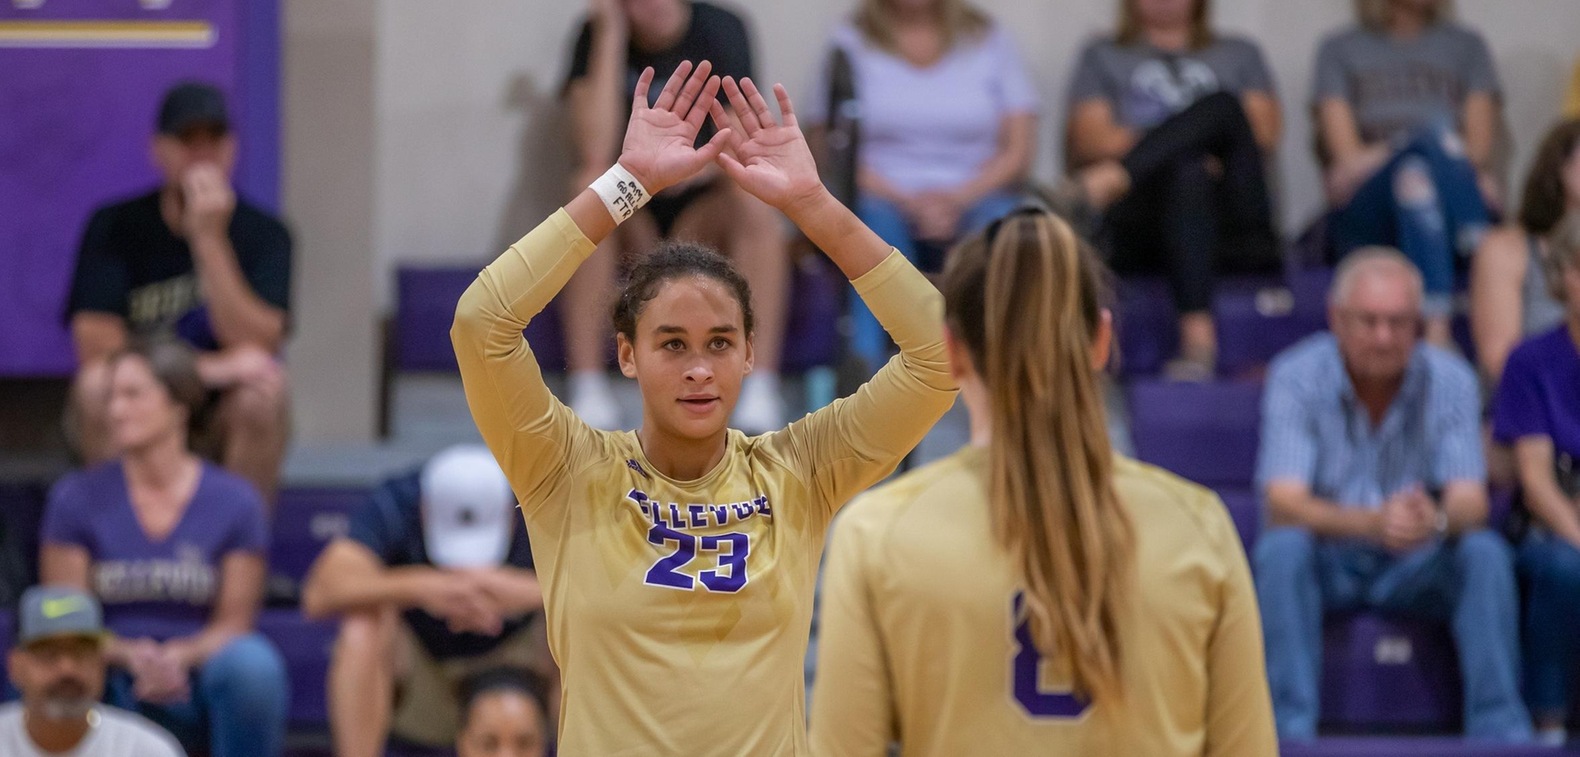 Eve Fountain registered a match-high 12 kills on .321 hitting.